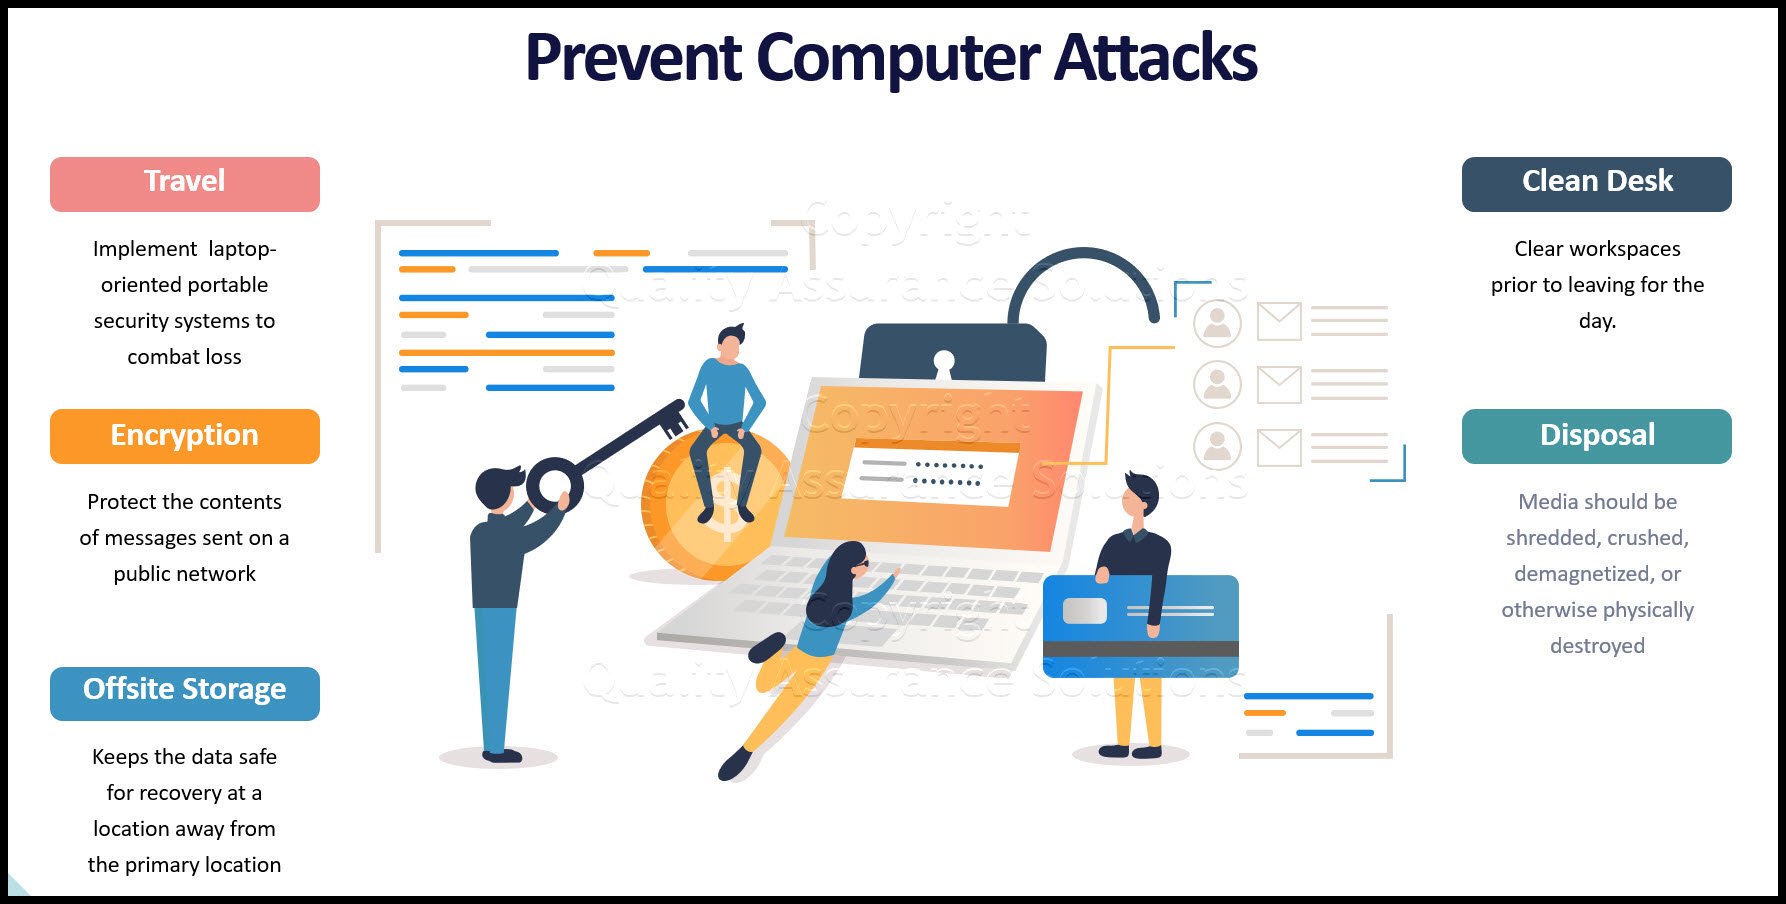 Take these actions to prevent attacks on computer security. Article covers laptop issues, encryption, offsite storage, managing a clean desk, computer disposal, and dumpster divers.